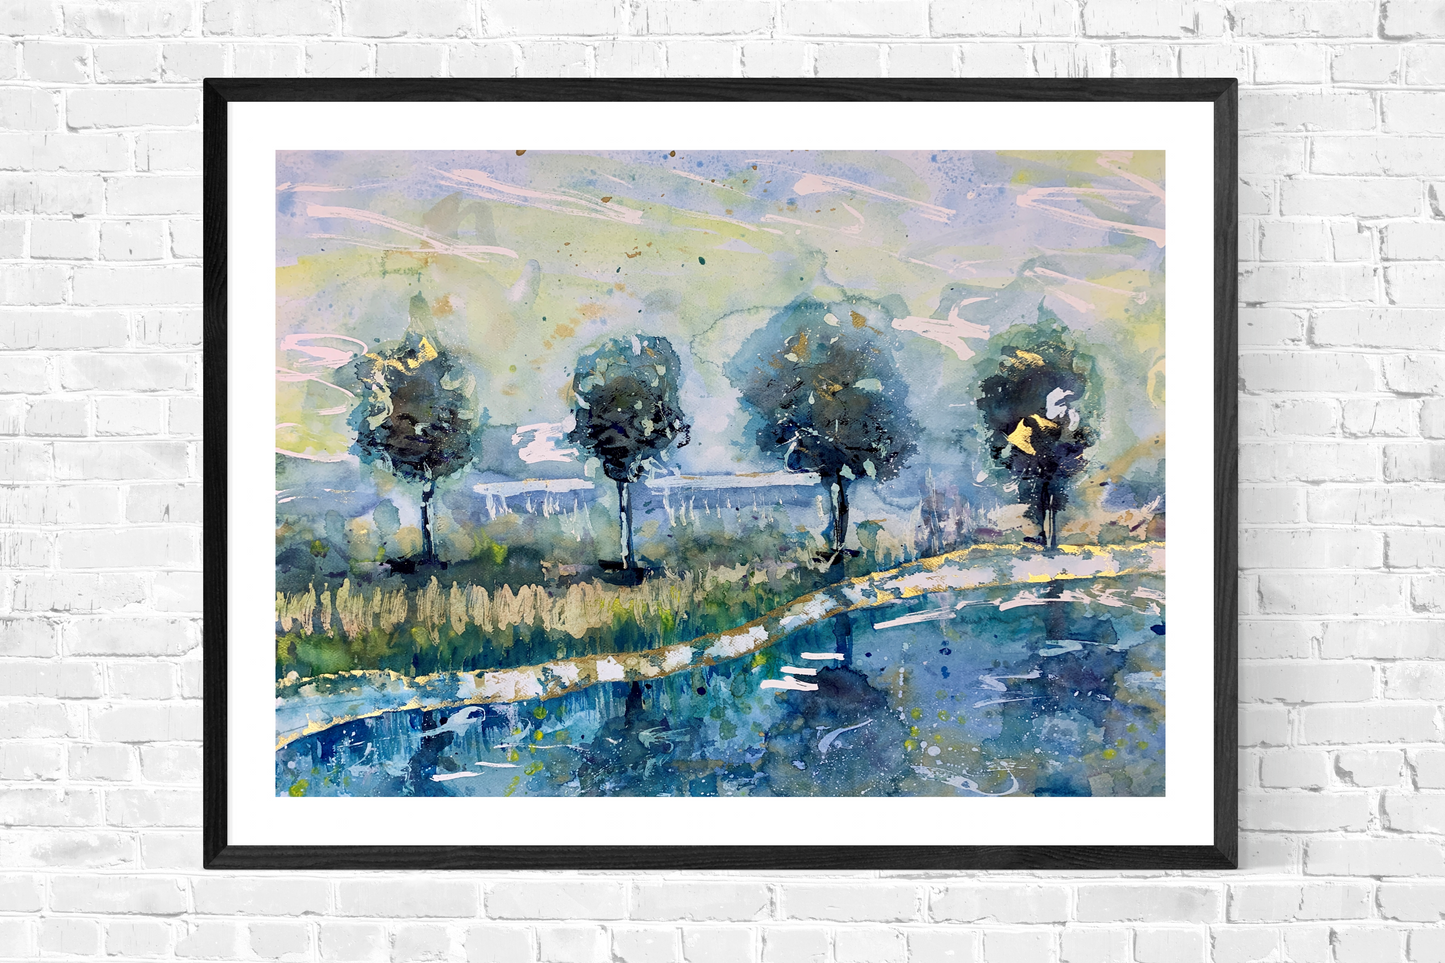 Water, Trees and Mist on the way Home (Original, Signed and Framed)